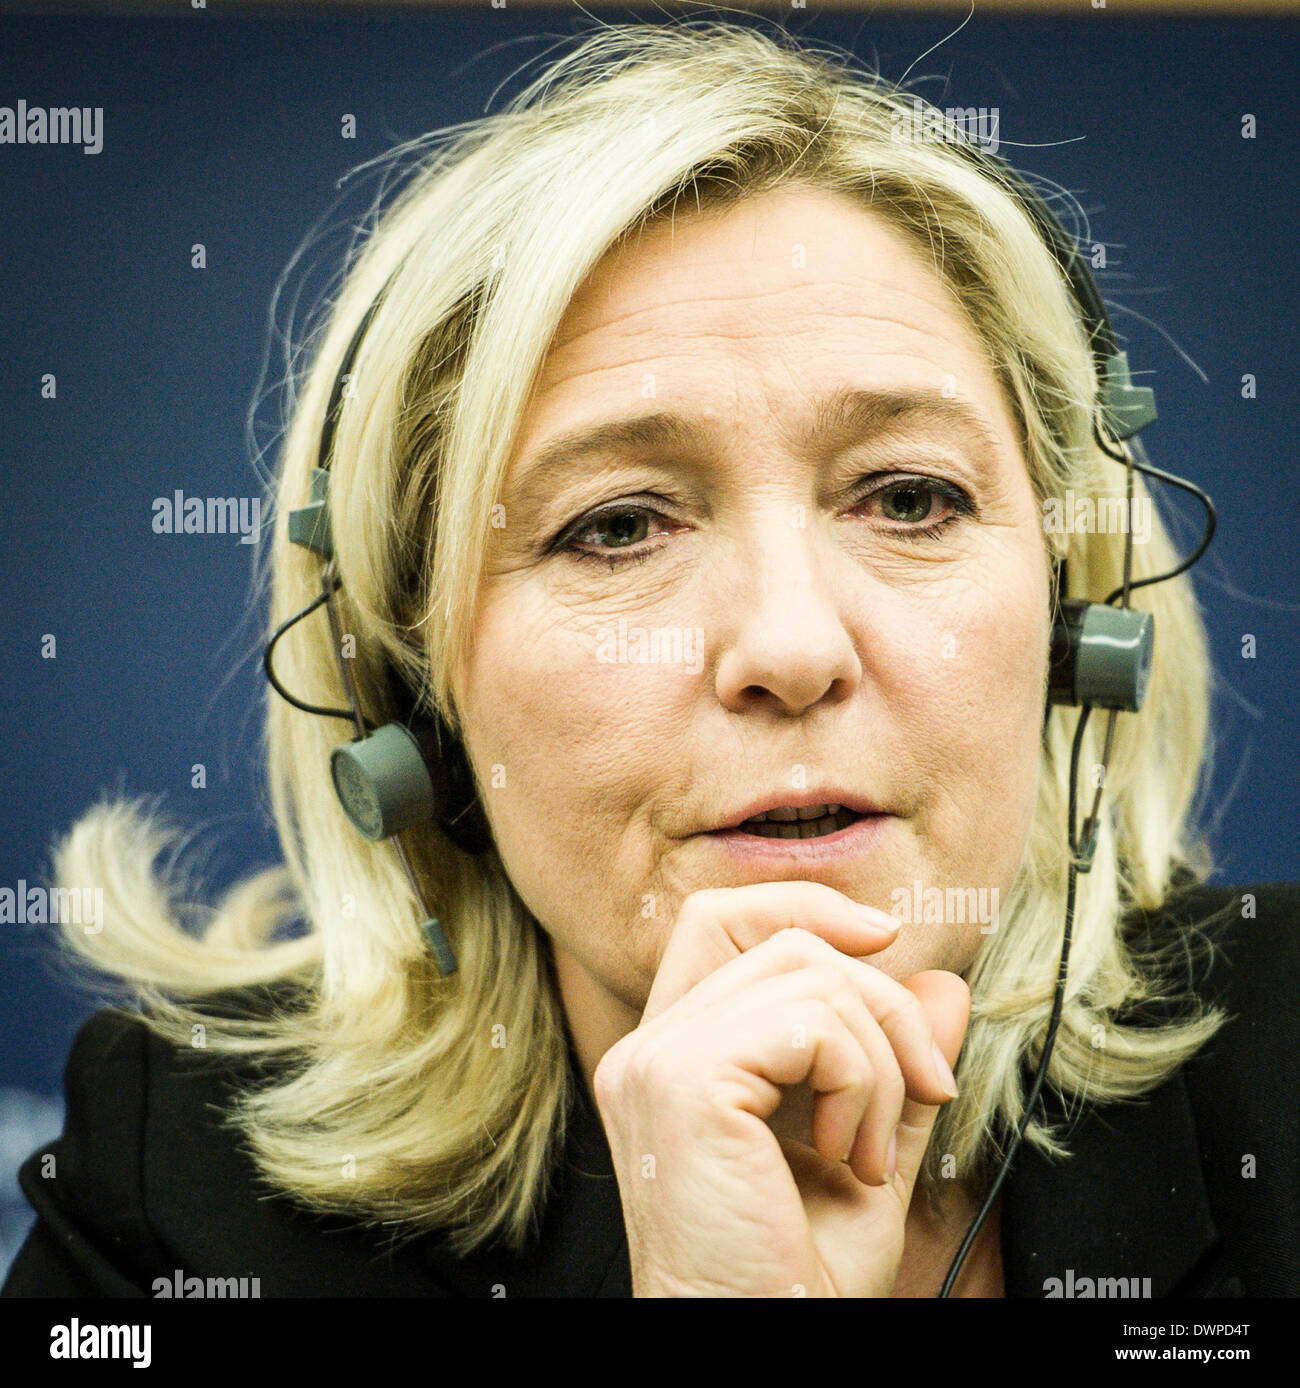 Strasbourg, Bxl, France. 12th Mar, 2014. Member of European Parliament (MEP) European Alliance for Freedom (EAF) co-president and Leader of the French right-wing party Front National (FN), Marine Le Pen holds press conference on European Elections at European Parliament headquarters in Strasbourg, France on 12.03.2014 Credit:  Wiktor Dabkowski/ZUMAPRESS.com/Alamy Live News Stock Photo